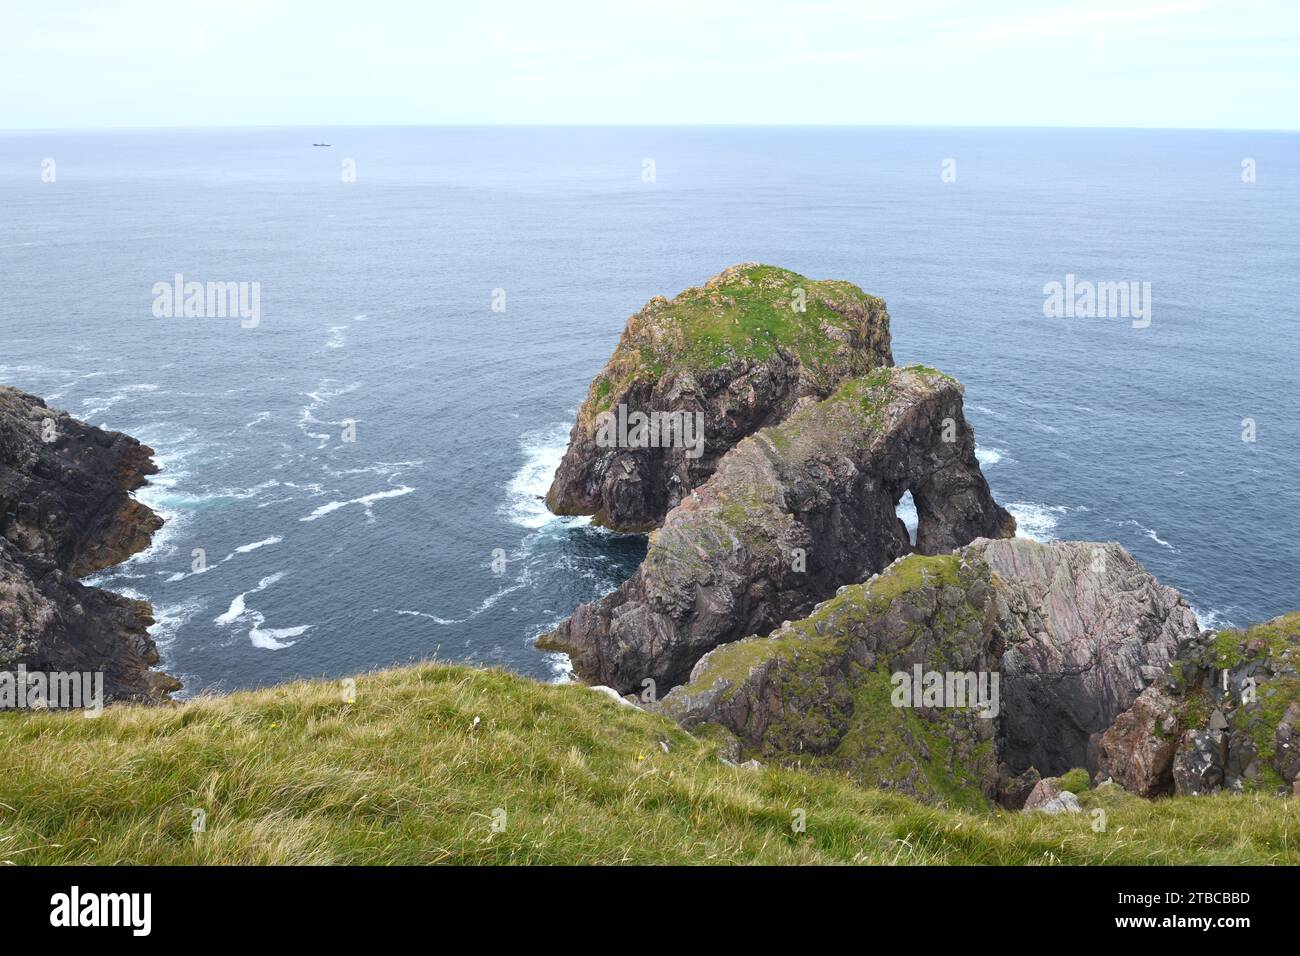 Cape Wrath and Stac an Dunain, the most north westerly point of Scotland and the British Isles looking over the Atlantic Ocean. Stock Photo